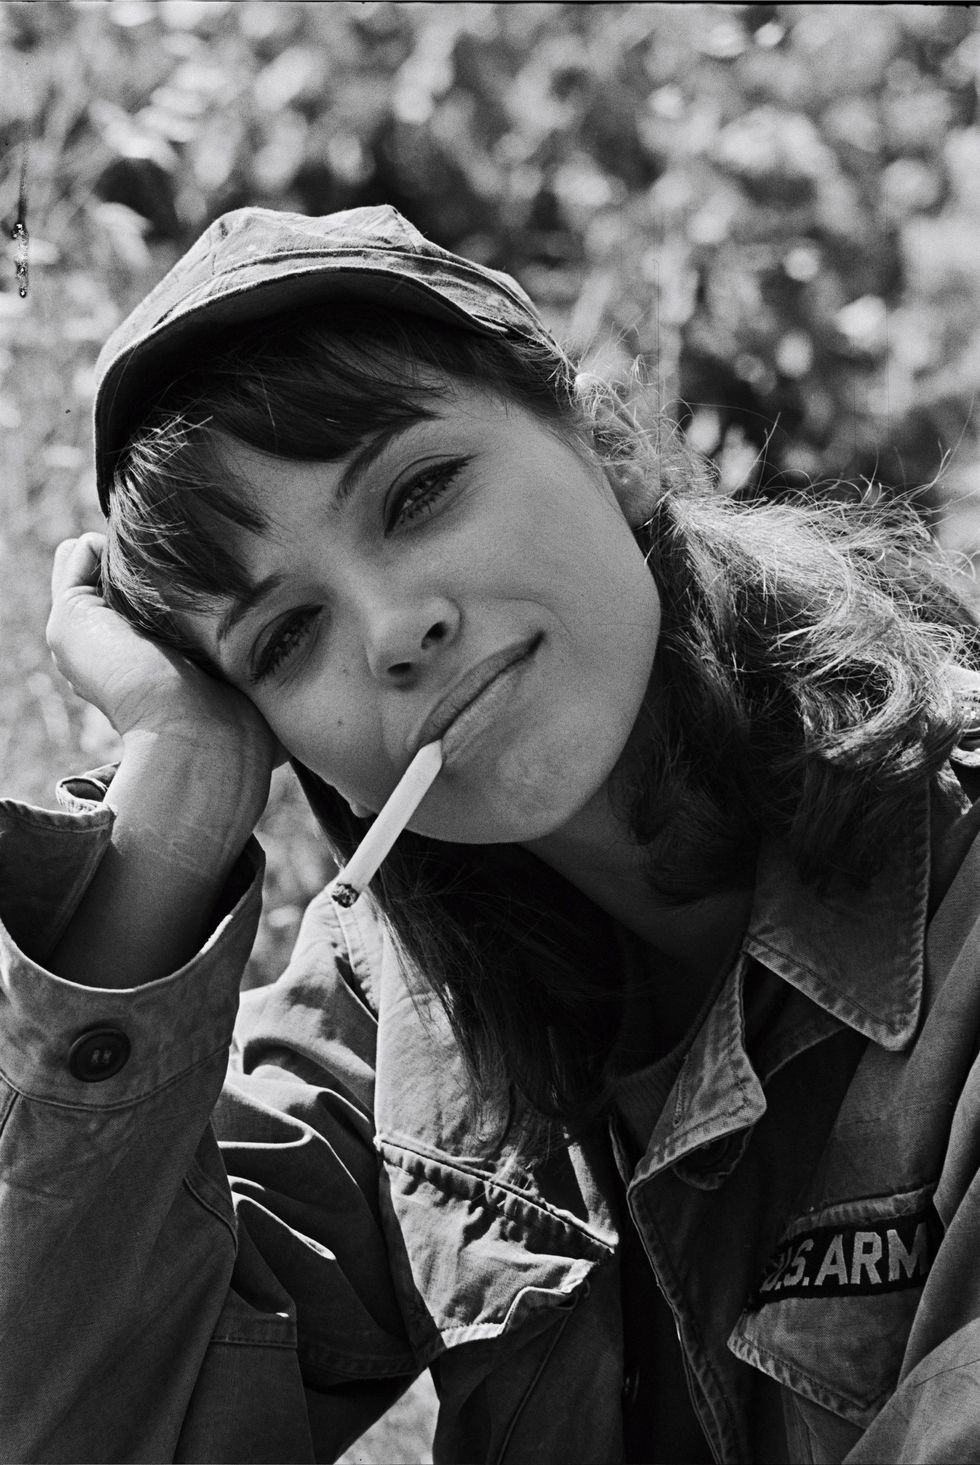 france   june 01  shooting pierrot le fou anna karina in france in june, 1965  photo by reporters associesgamma rapho via getty images